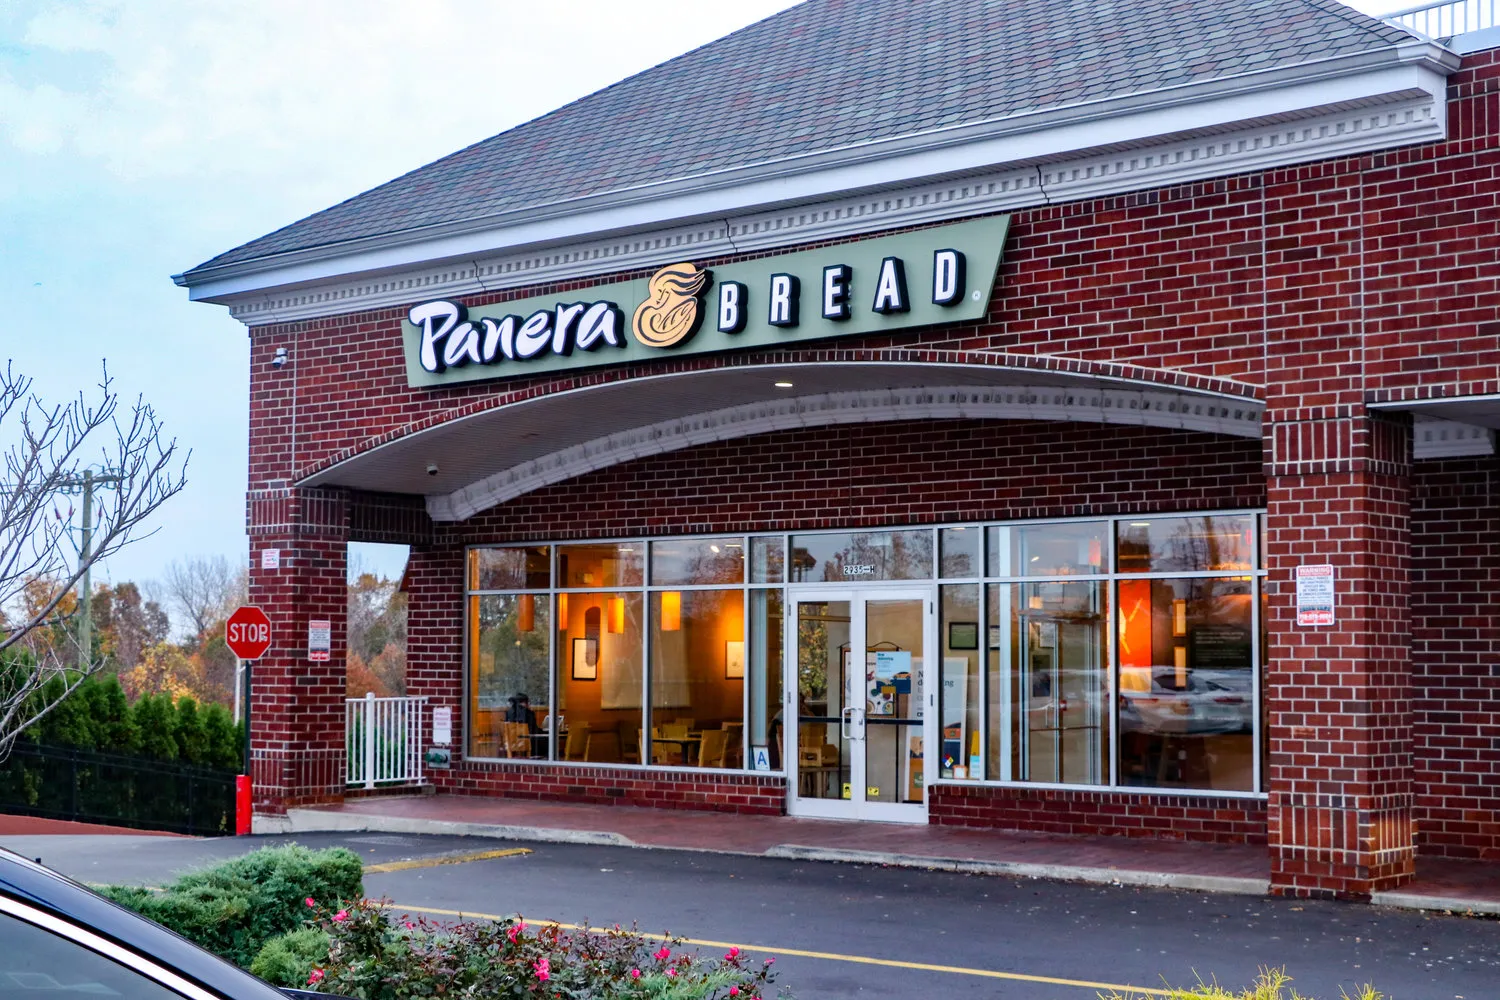 The Best Time to Visit Panera Bread